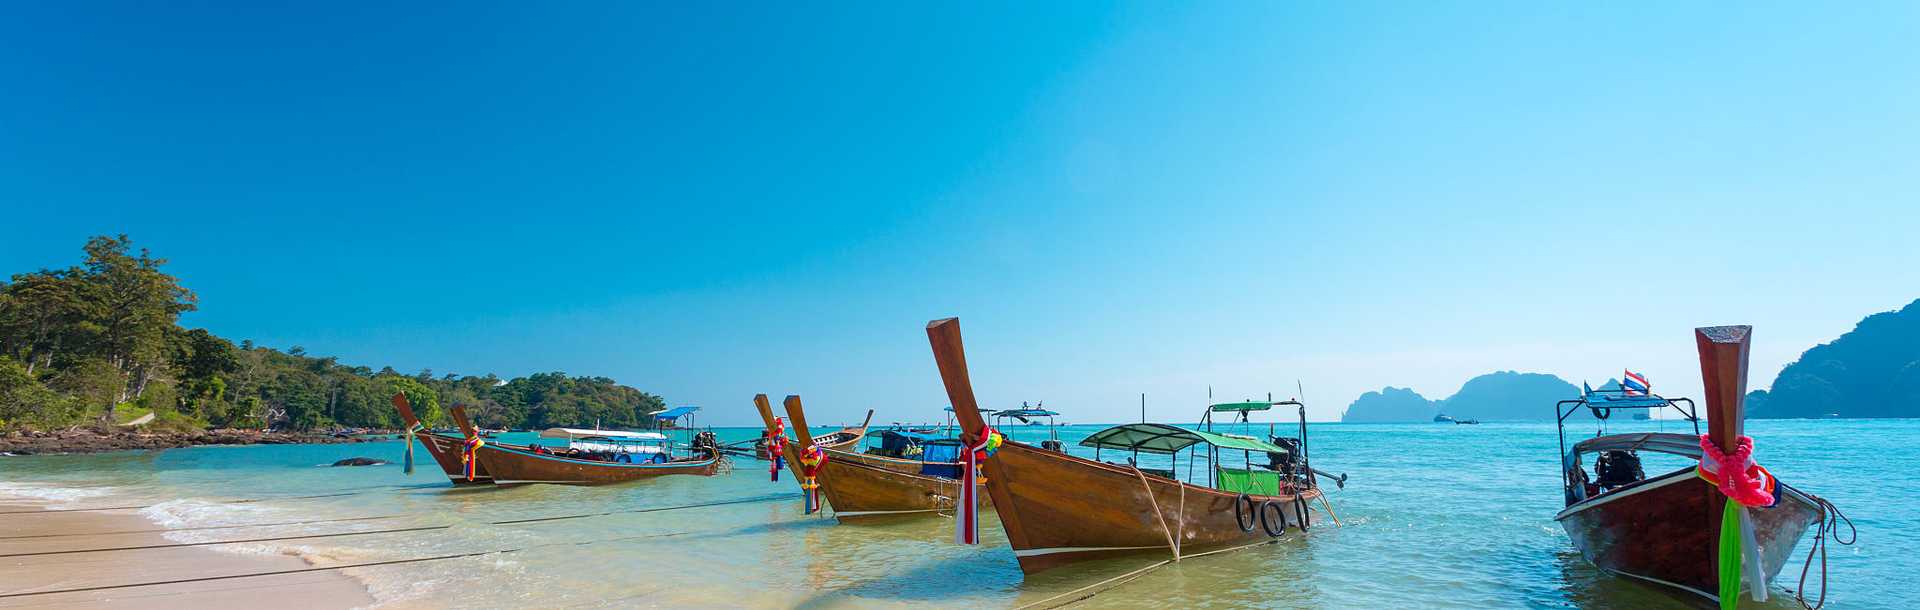 Boats on the beach with beautiful blue sky in Krabi, Thailand.